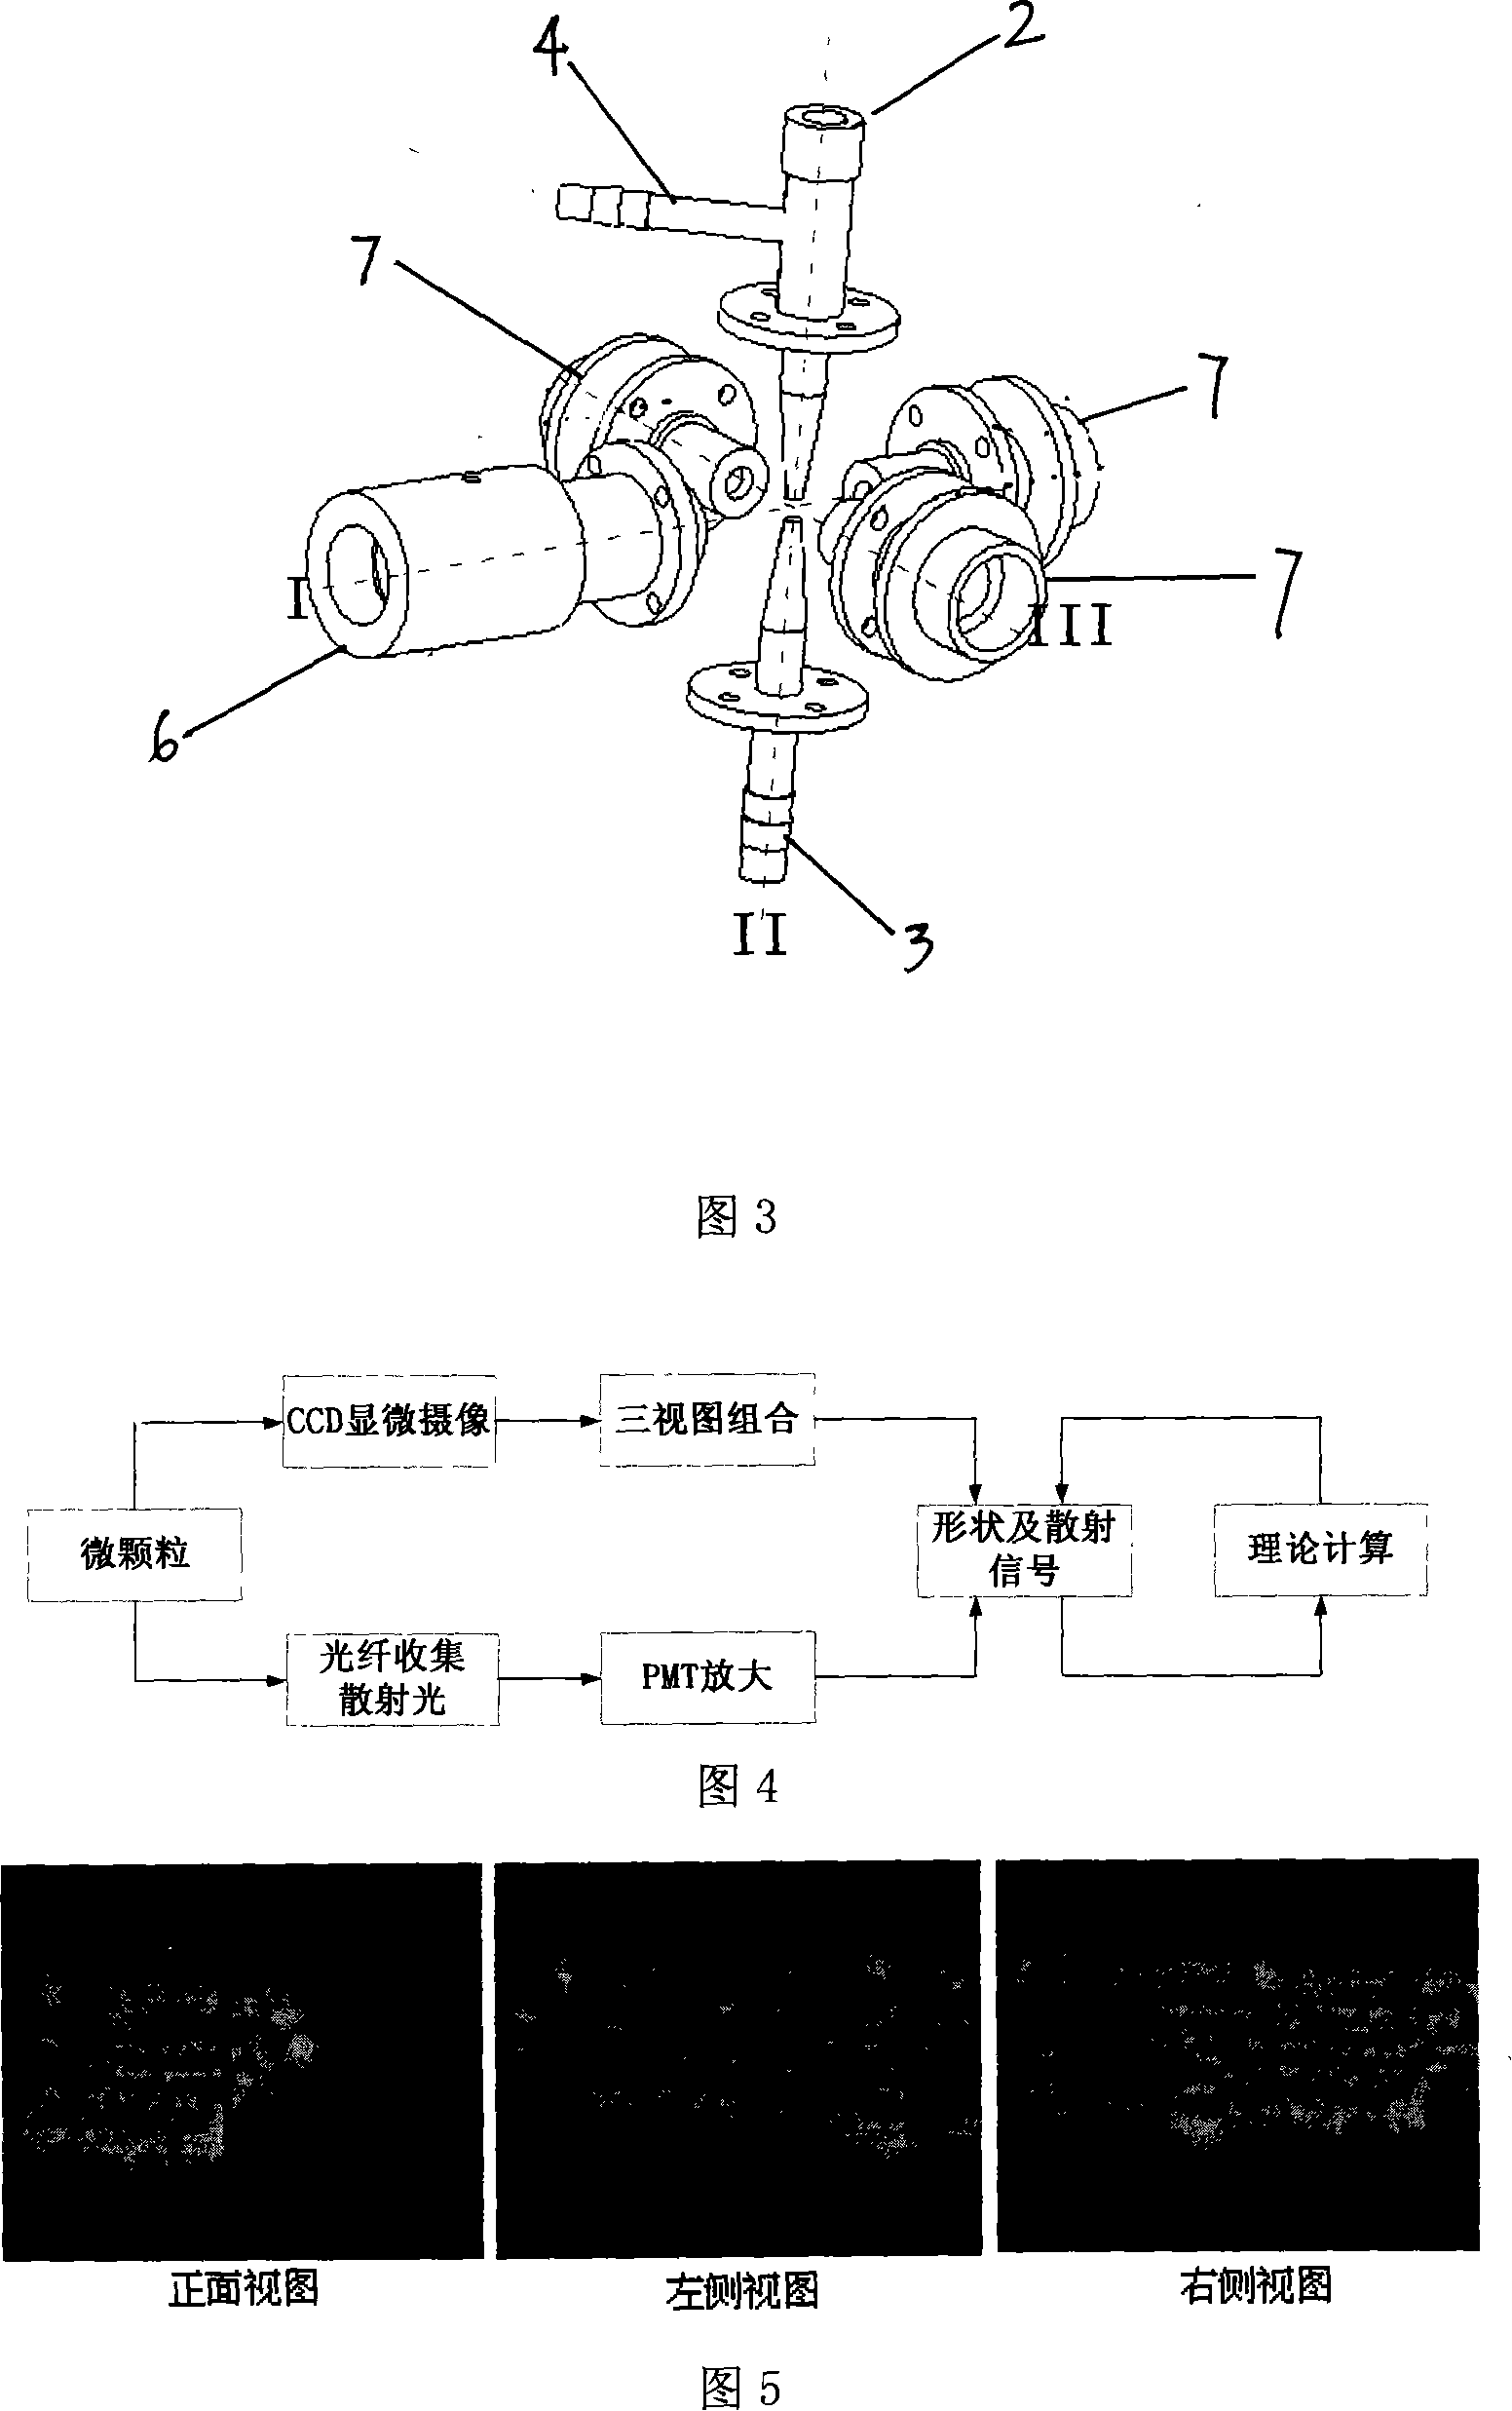 Device for monitoring micro-particles shapes and dispersion based on image